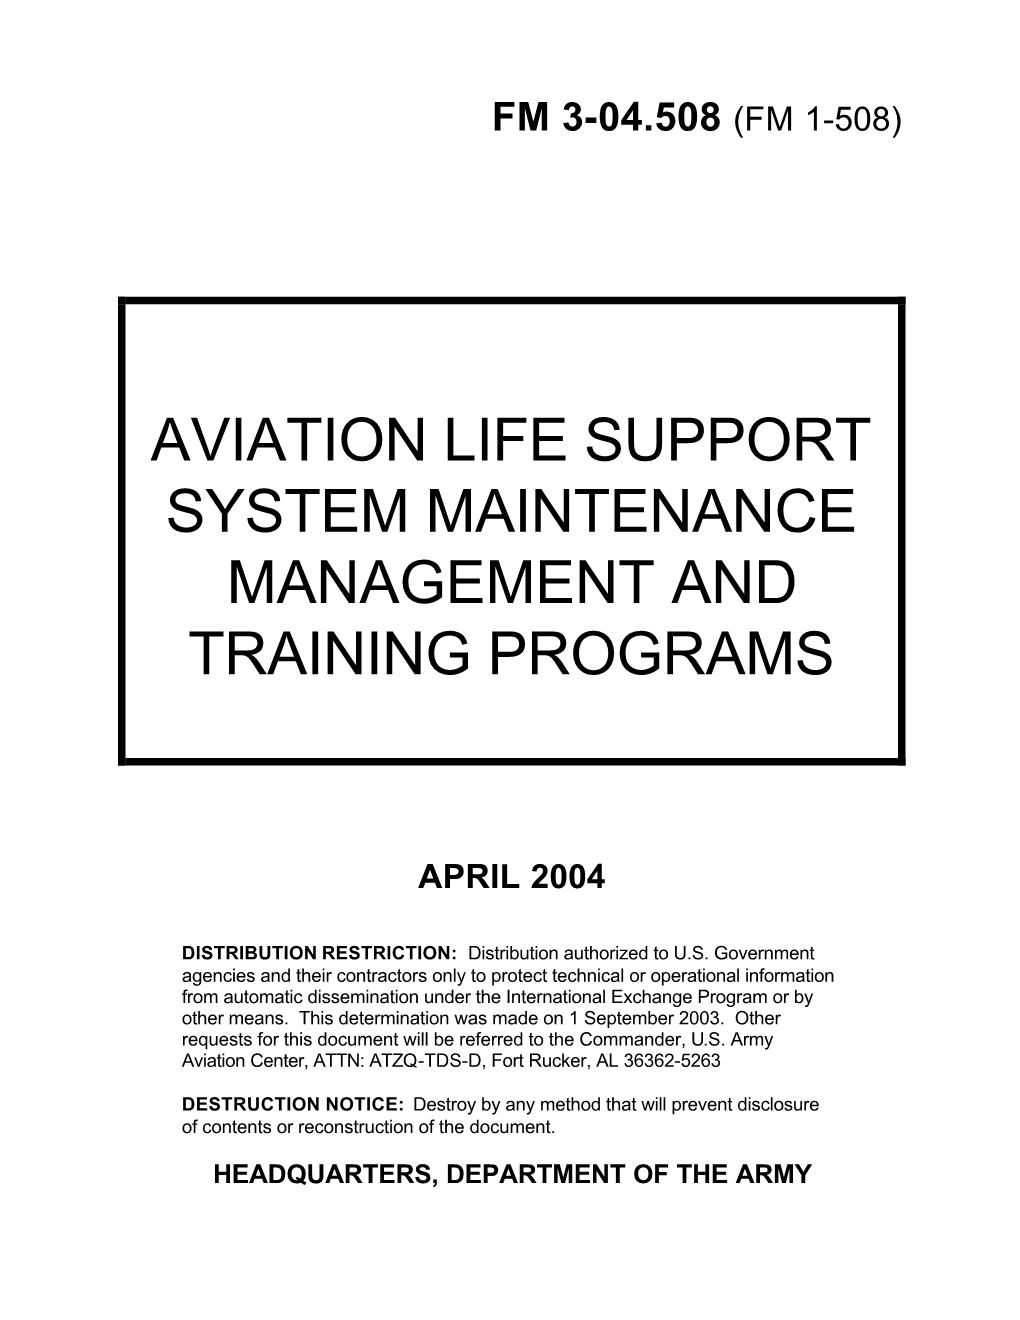 Aviation Life Support System Maintenance Management and Training Programs